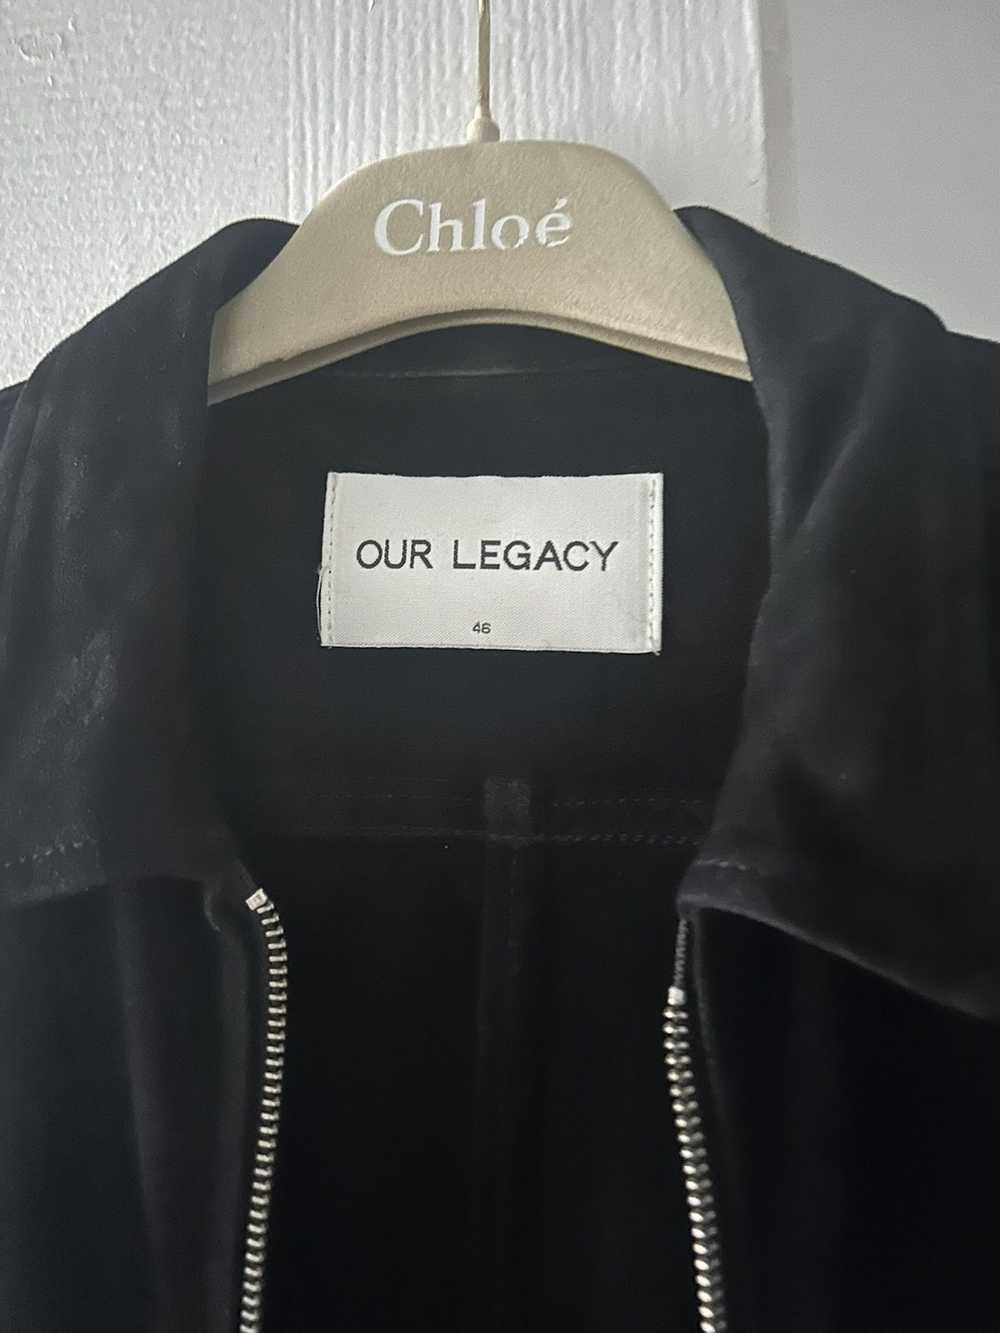 Our Legacy Our Legacy Suede Zip Shirt/Jacket - image 5